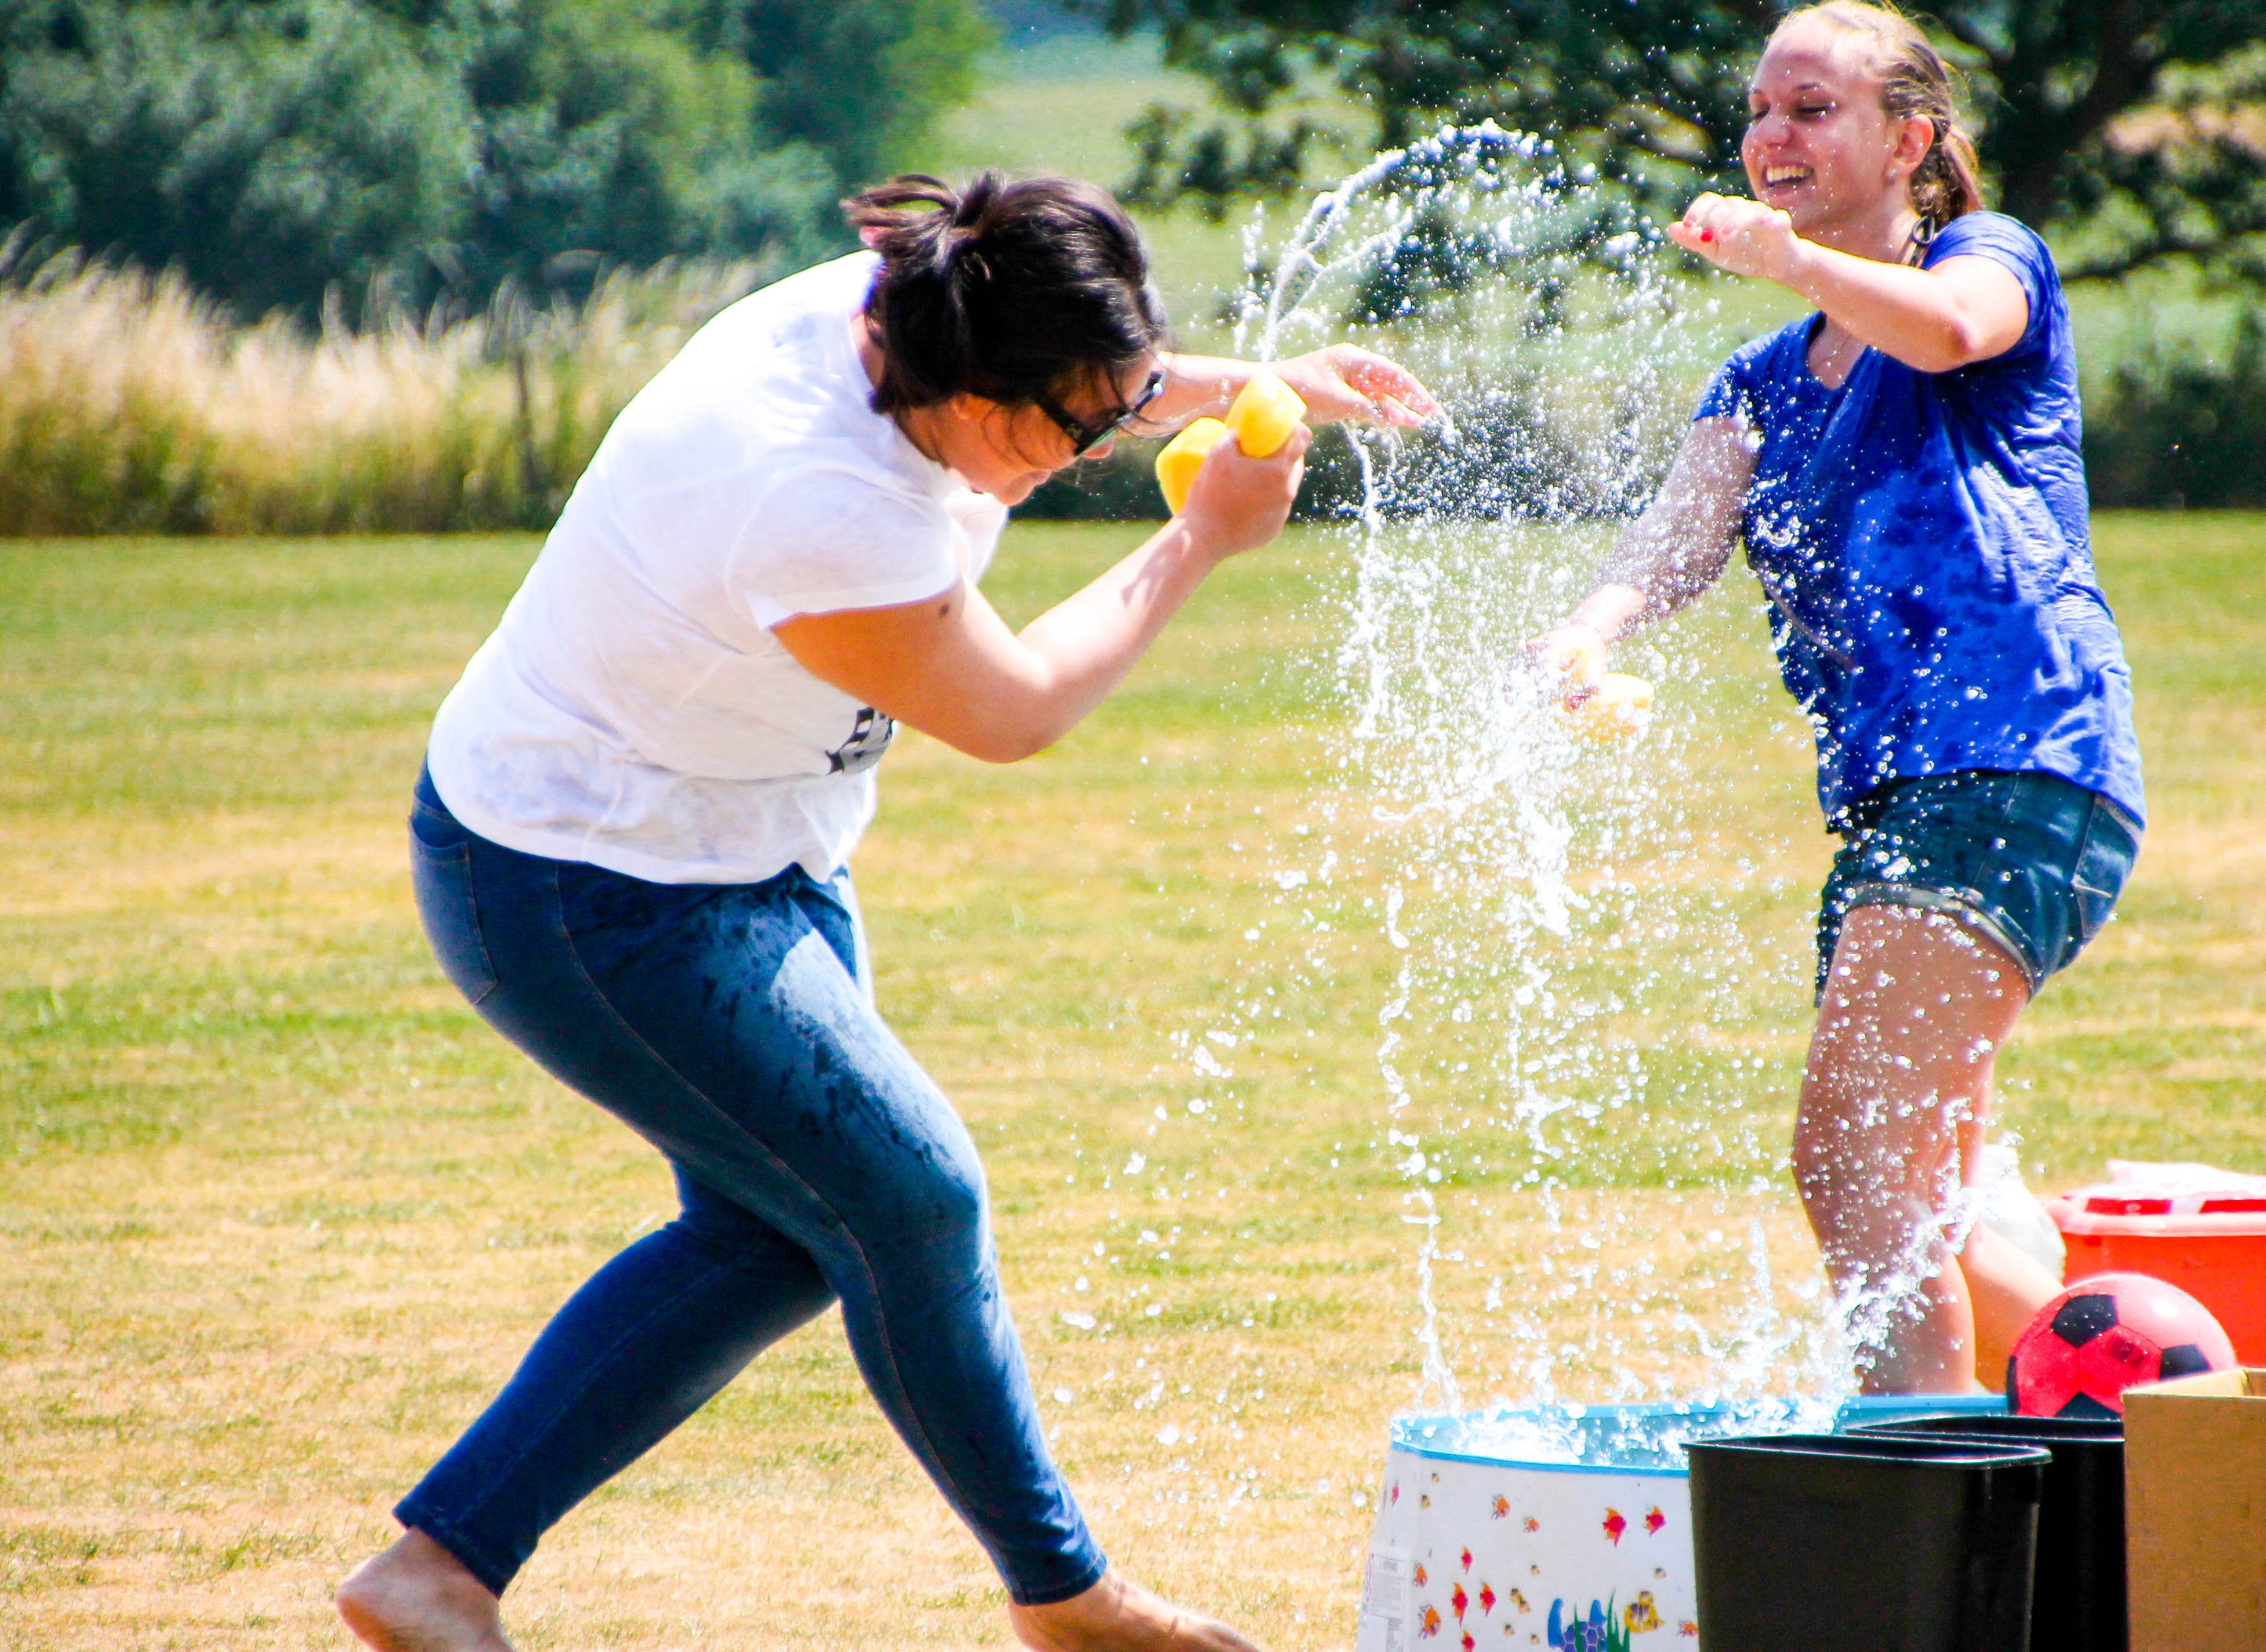 water fight girls (1 of 1) - Etherton Education